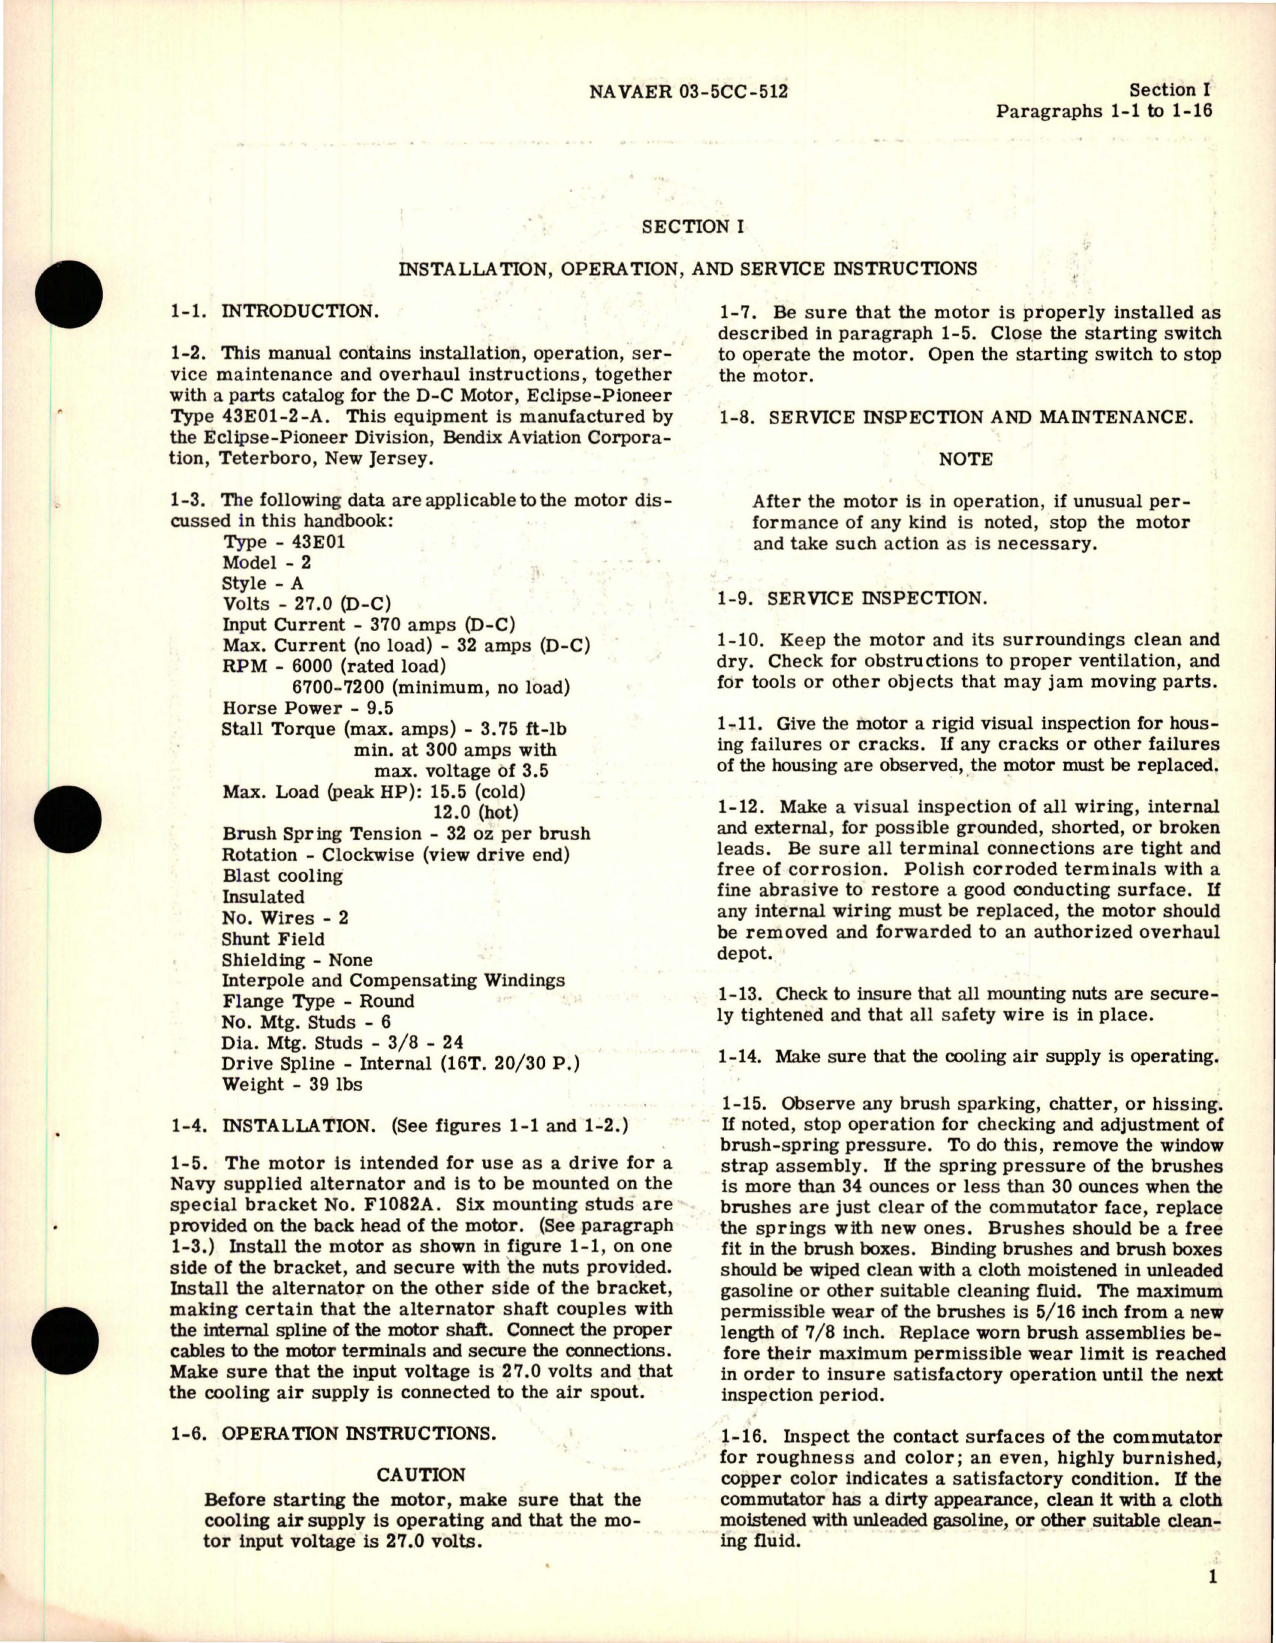 Sample page 5 from AirCorps Library document: Operation, Service an Overhaul Instructions with Parts Catalog for DC Motor - Model 43EO1-2-A 